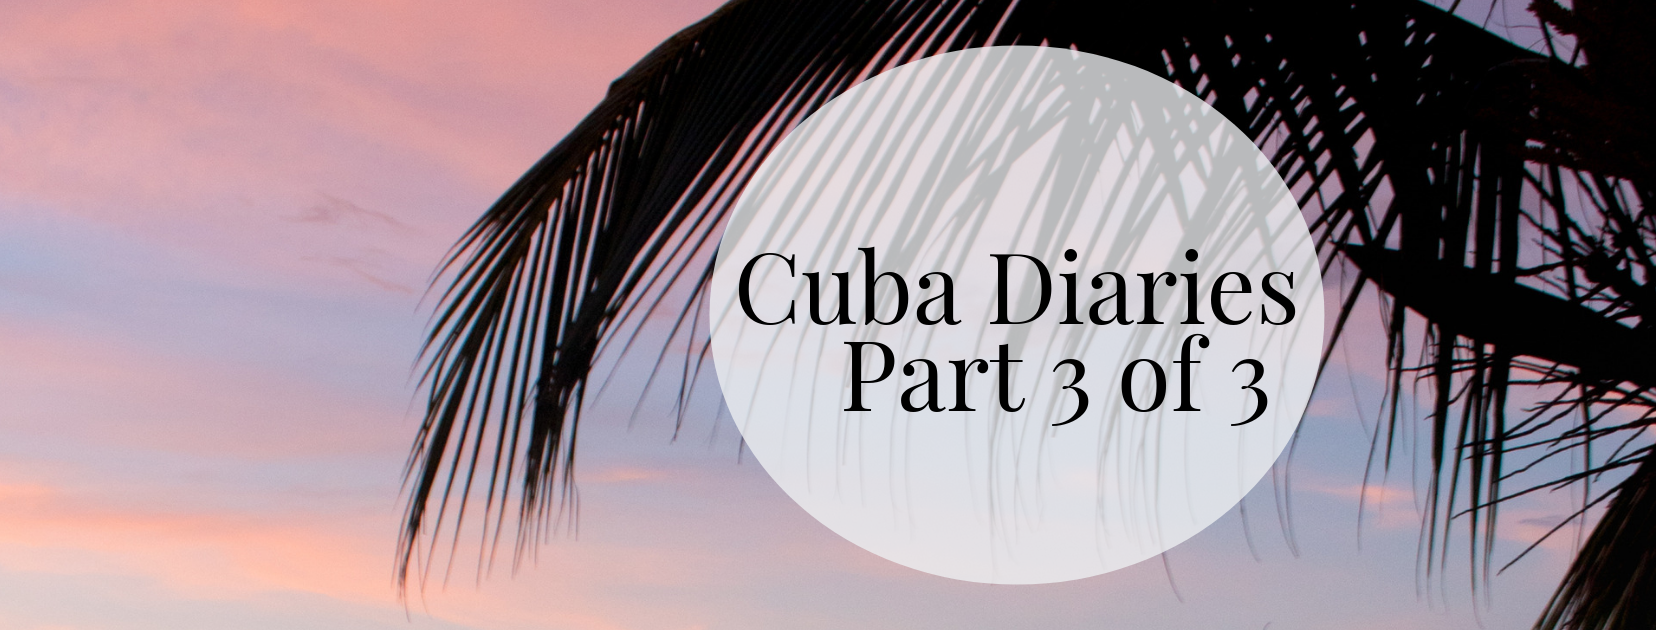 banner for blog post cuba diaries part 3 of 3